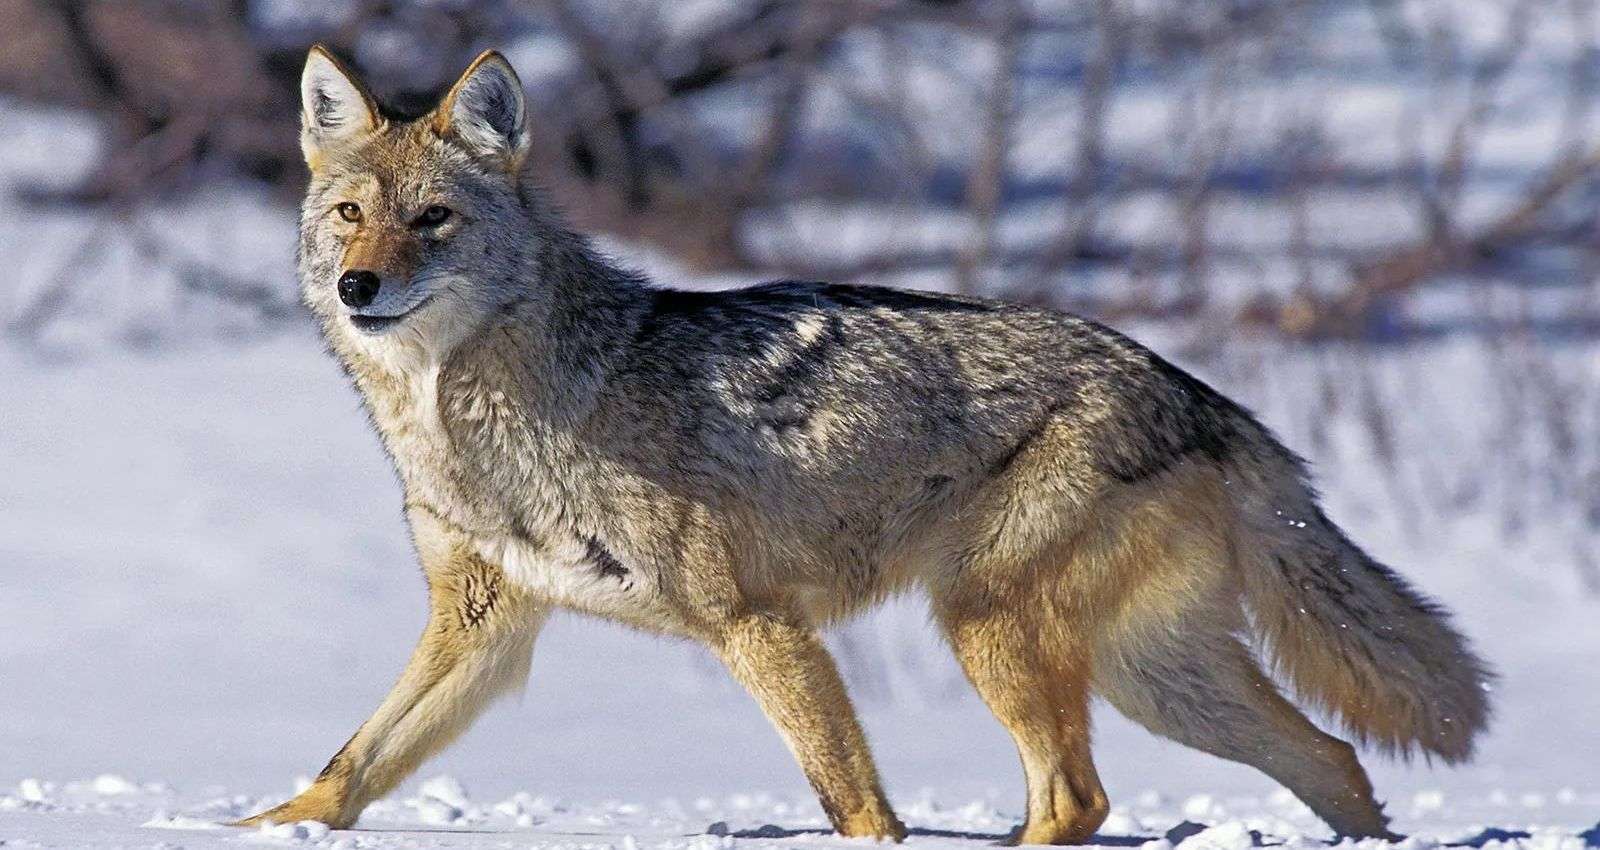 How far away can a coyote smell a cat?